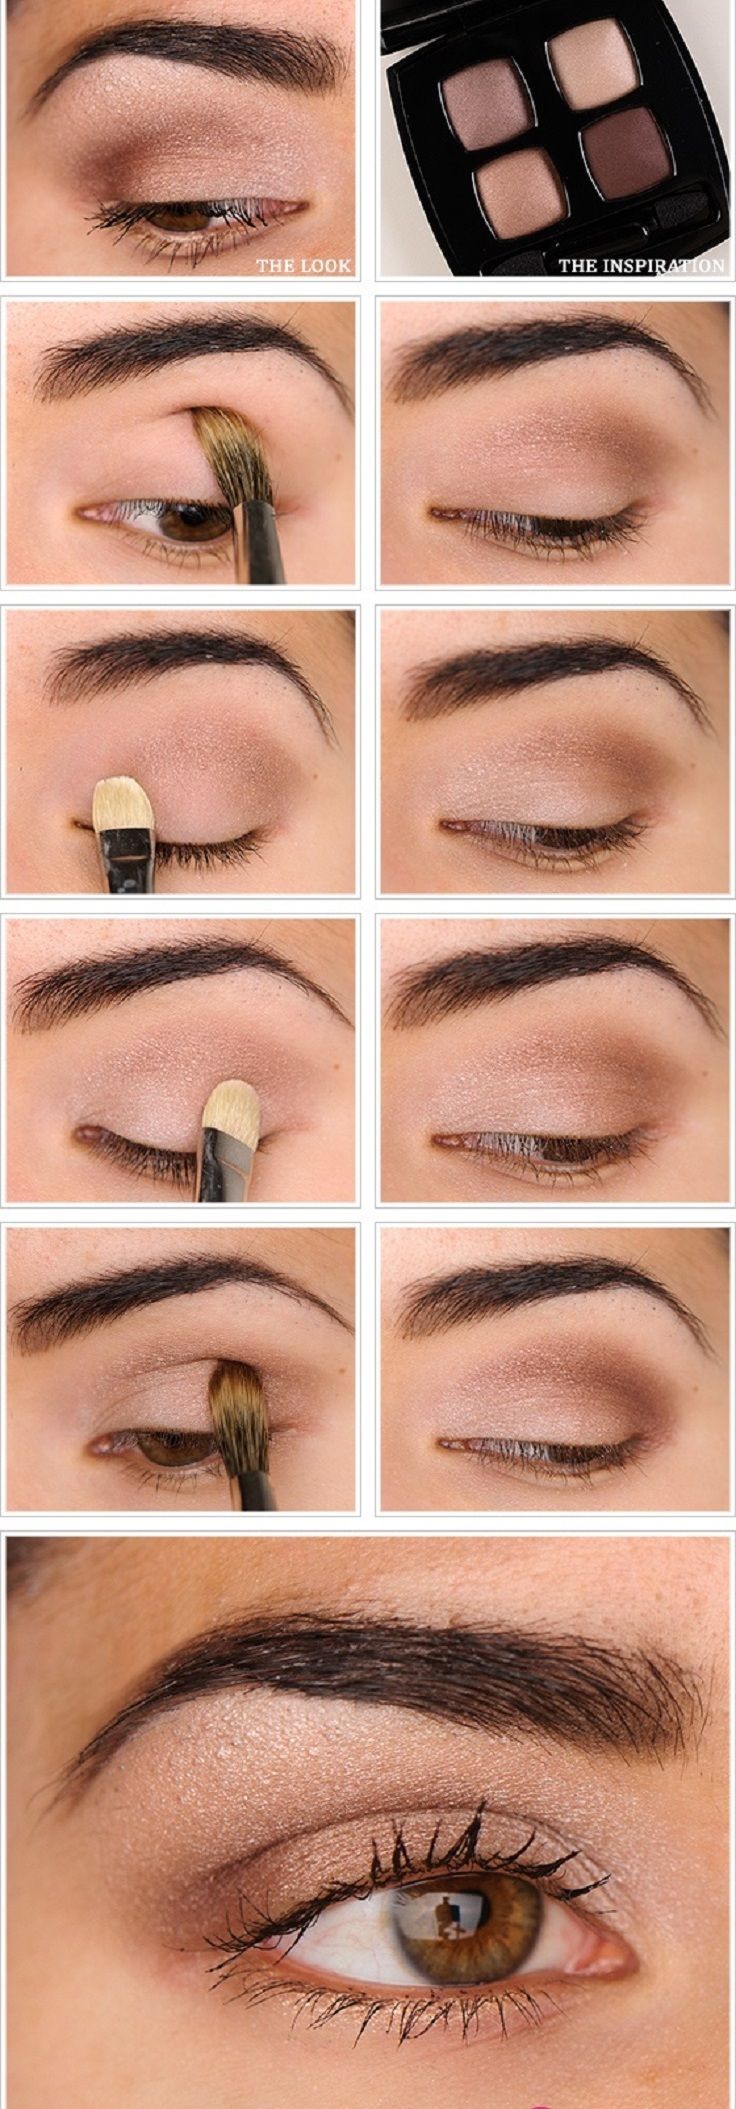 Top 10 Tutorials for Natural Eye Make-Up – Top Inspired